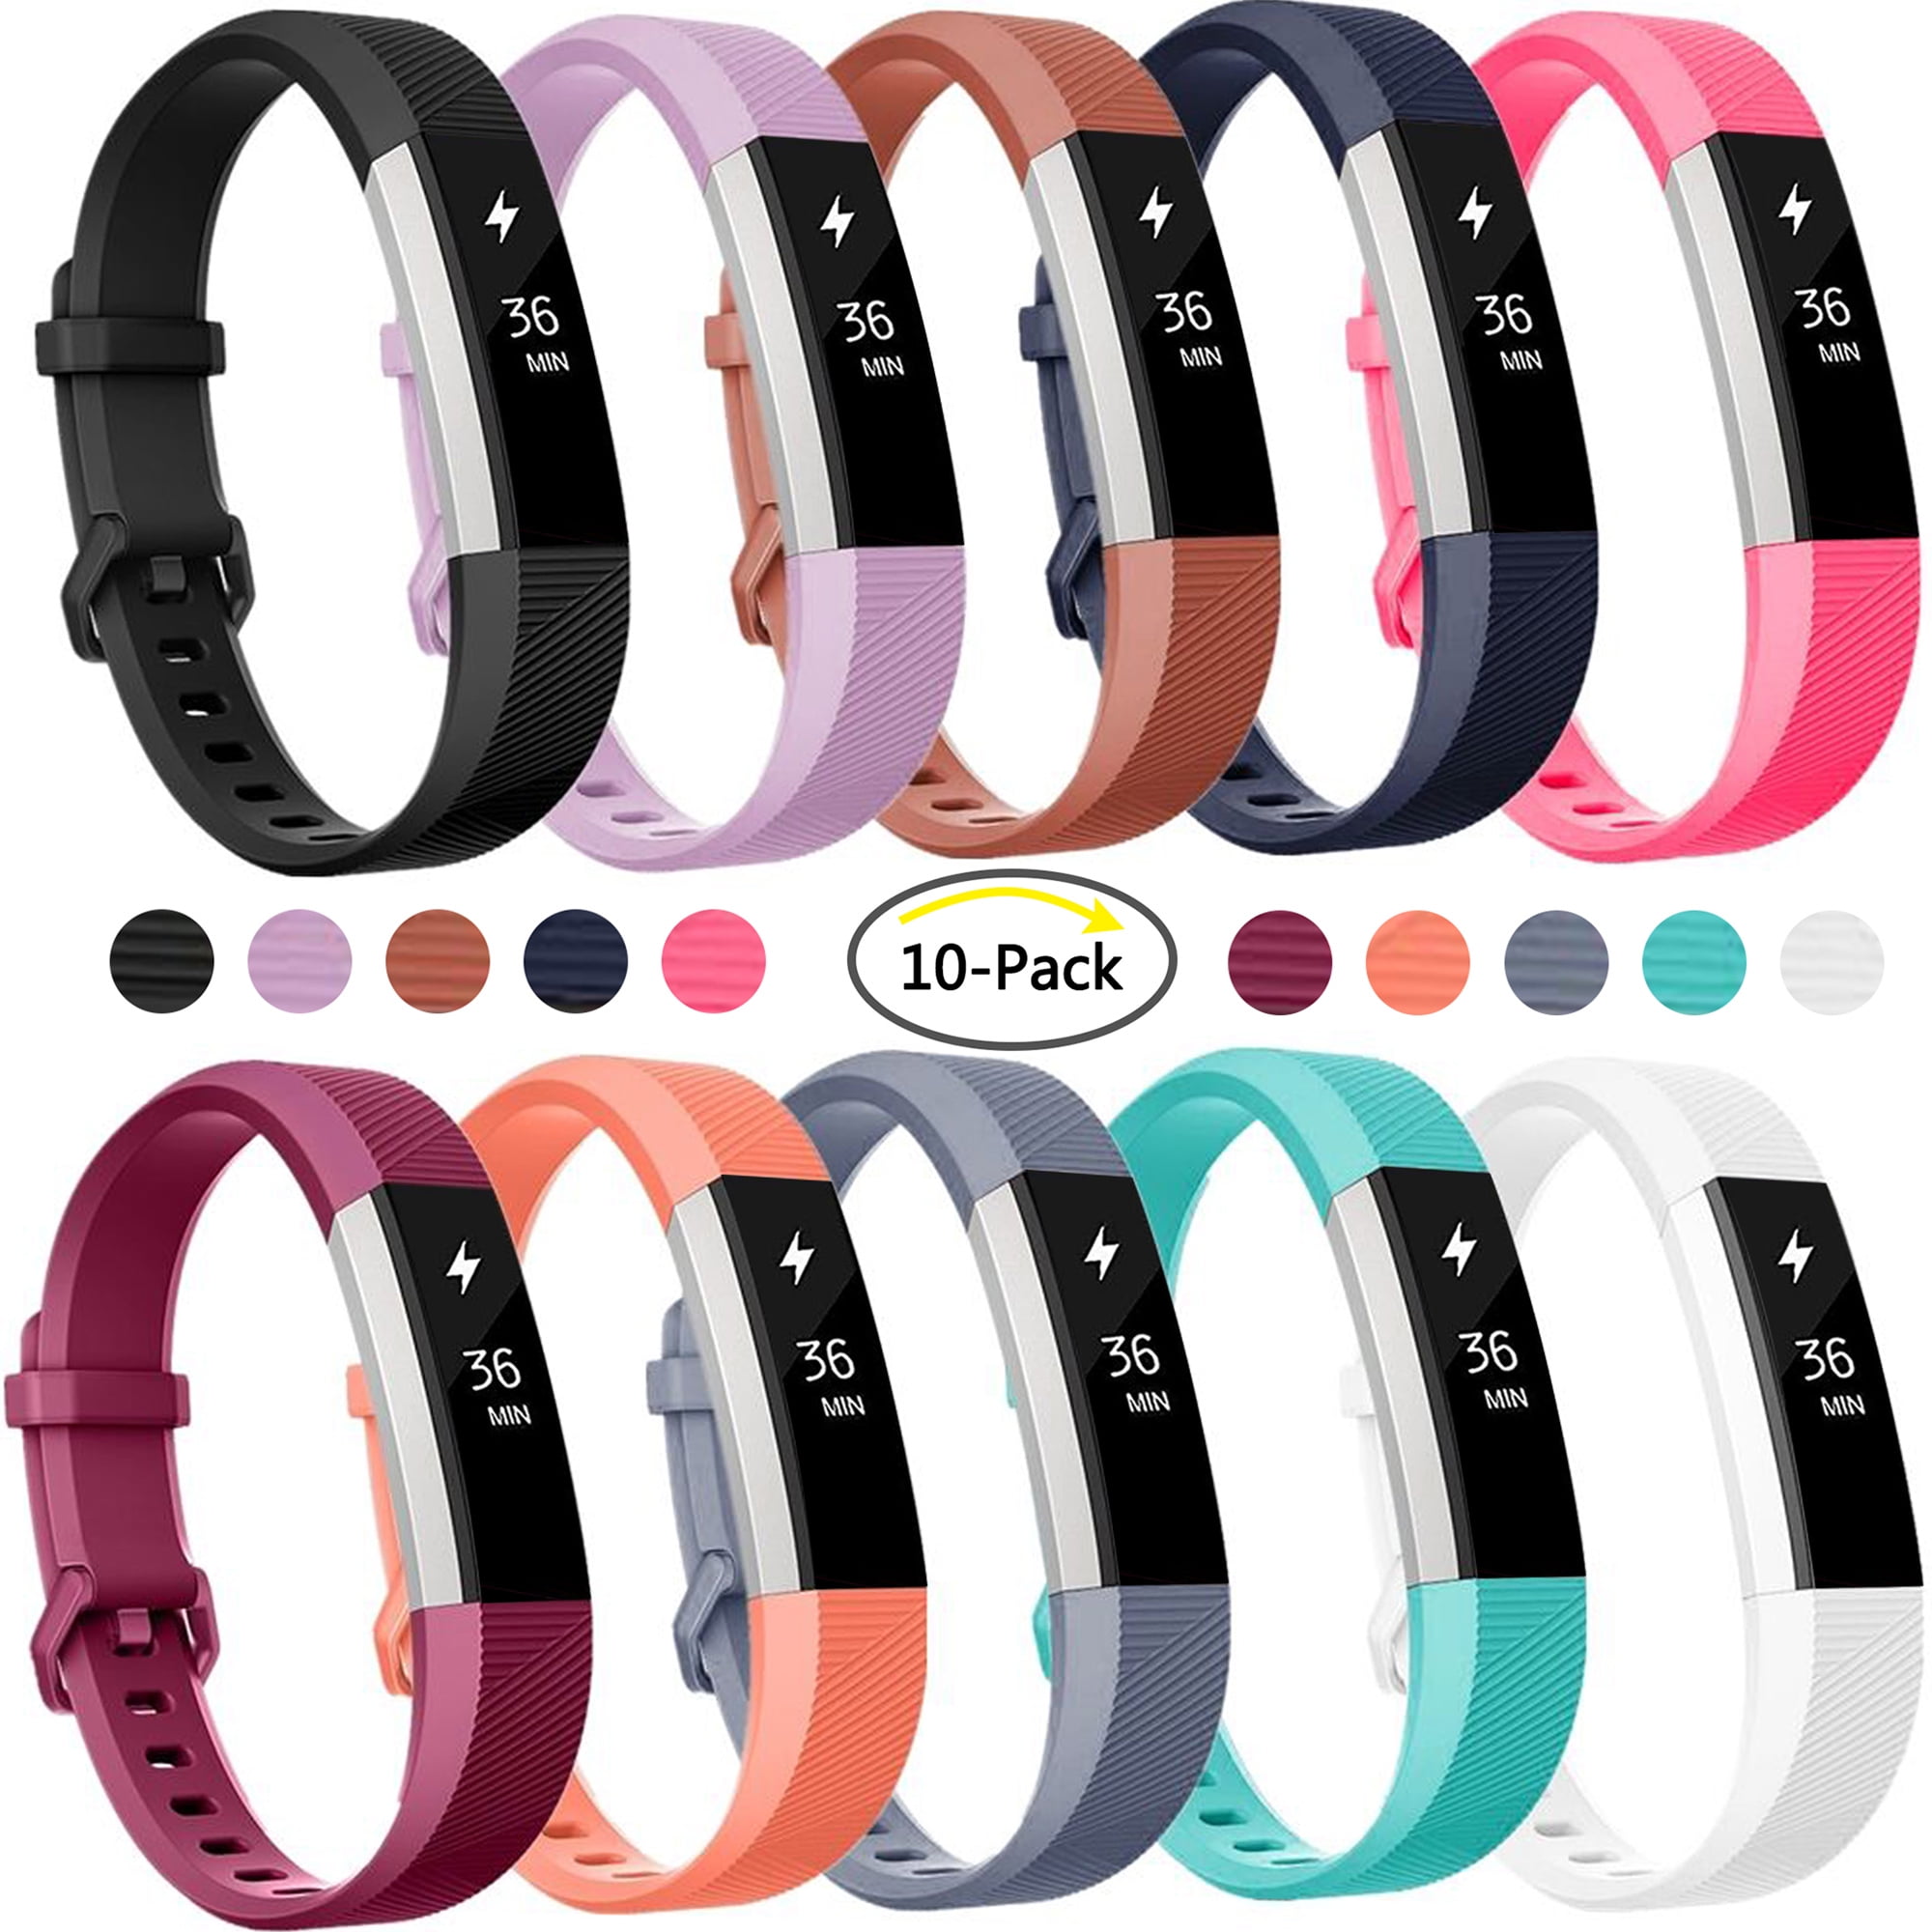 3 Pack Soft Silicone Wristbands for Fitbit Alta HR Bands with Secure Metal Buckle for Men Women,Small Large GEAK Bands Compatible with Fitbit Alta and Fitbit Alta HR 